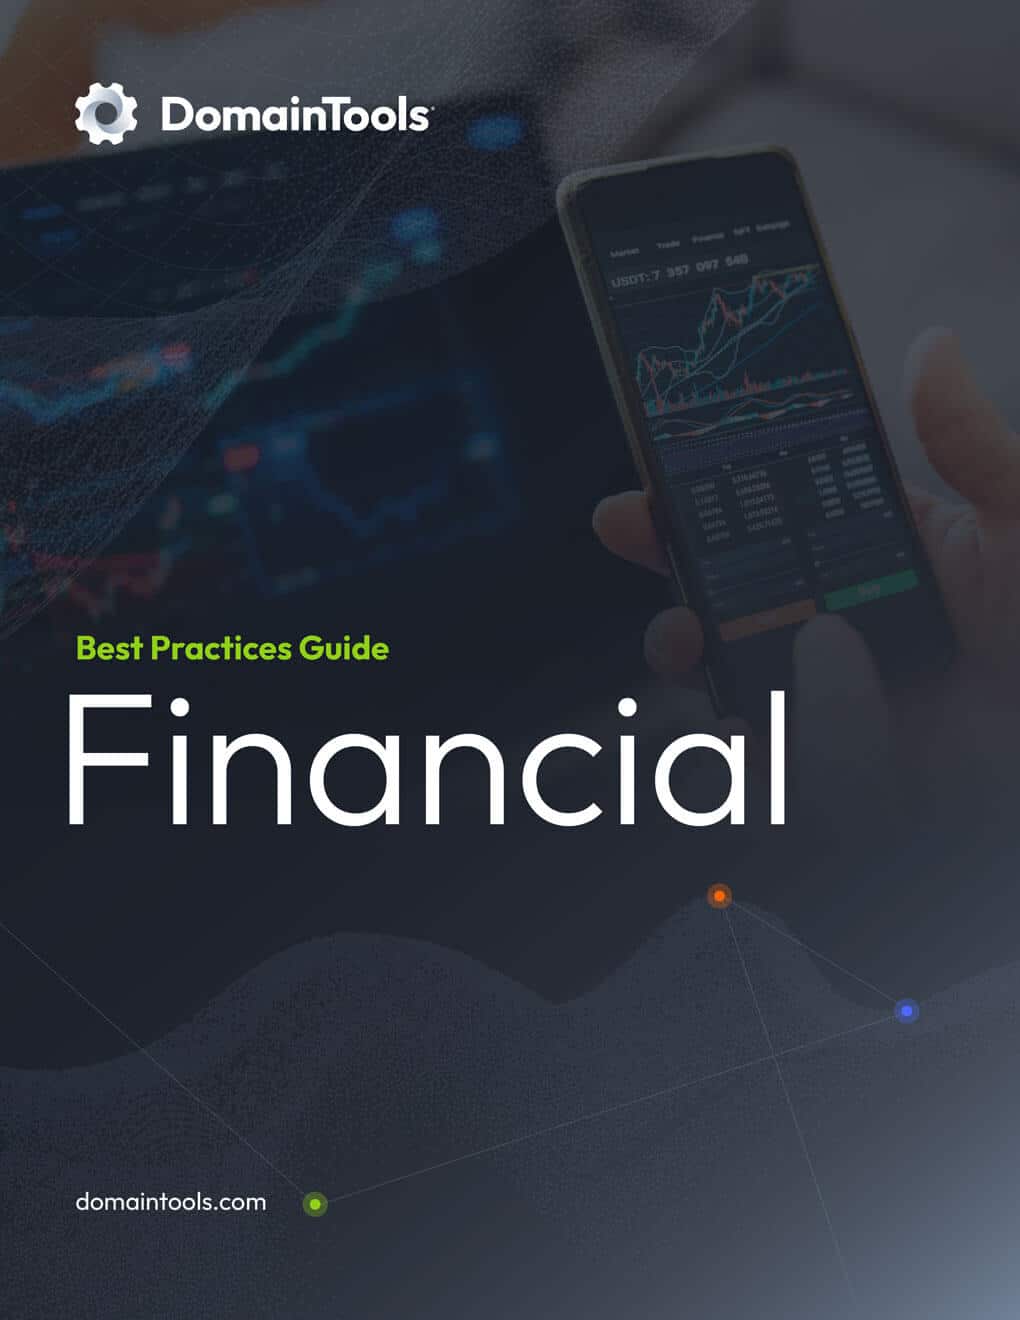 A person holds a smartphone displaying stock market graphs, overlaid with the text "best practices guide financial" and the domaintools logo, set against a background of digital graphs.